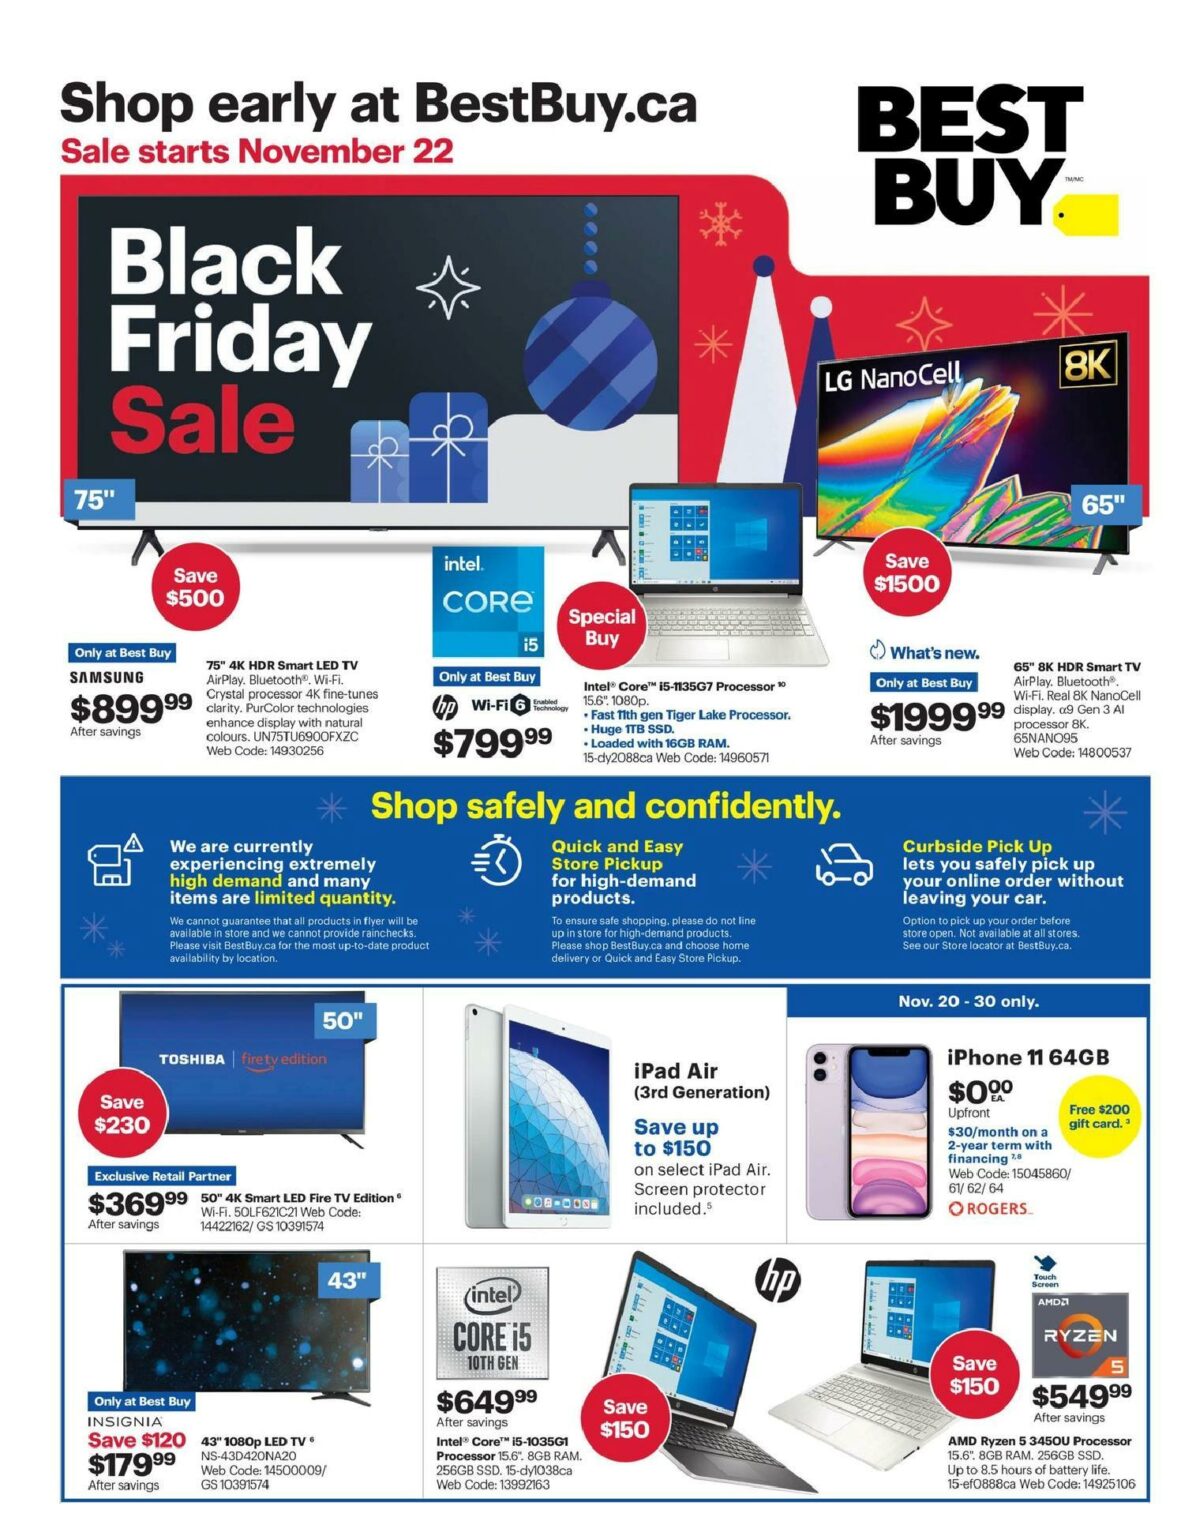 Best Buy Black Friday Flyer Deals 2020 Canada - What Are The Online Black Friday Deals